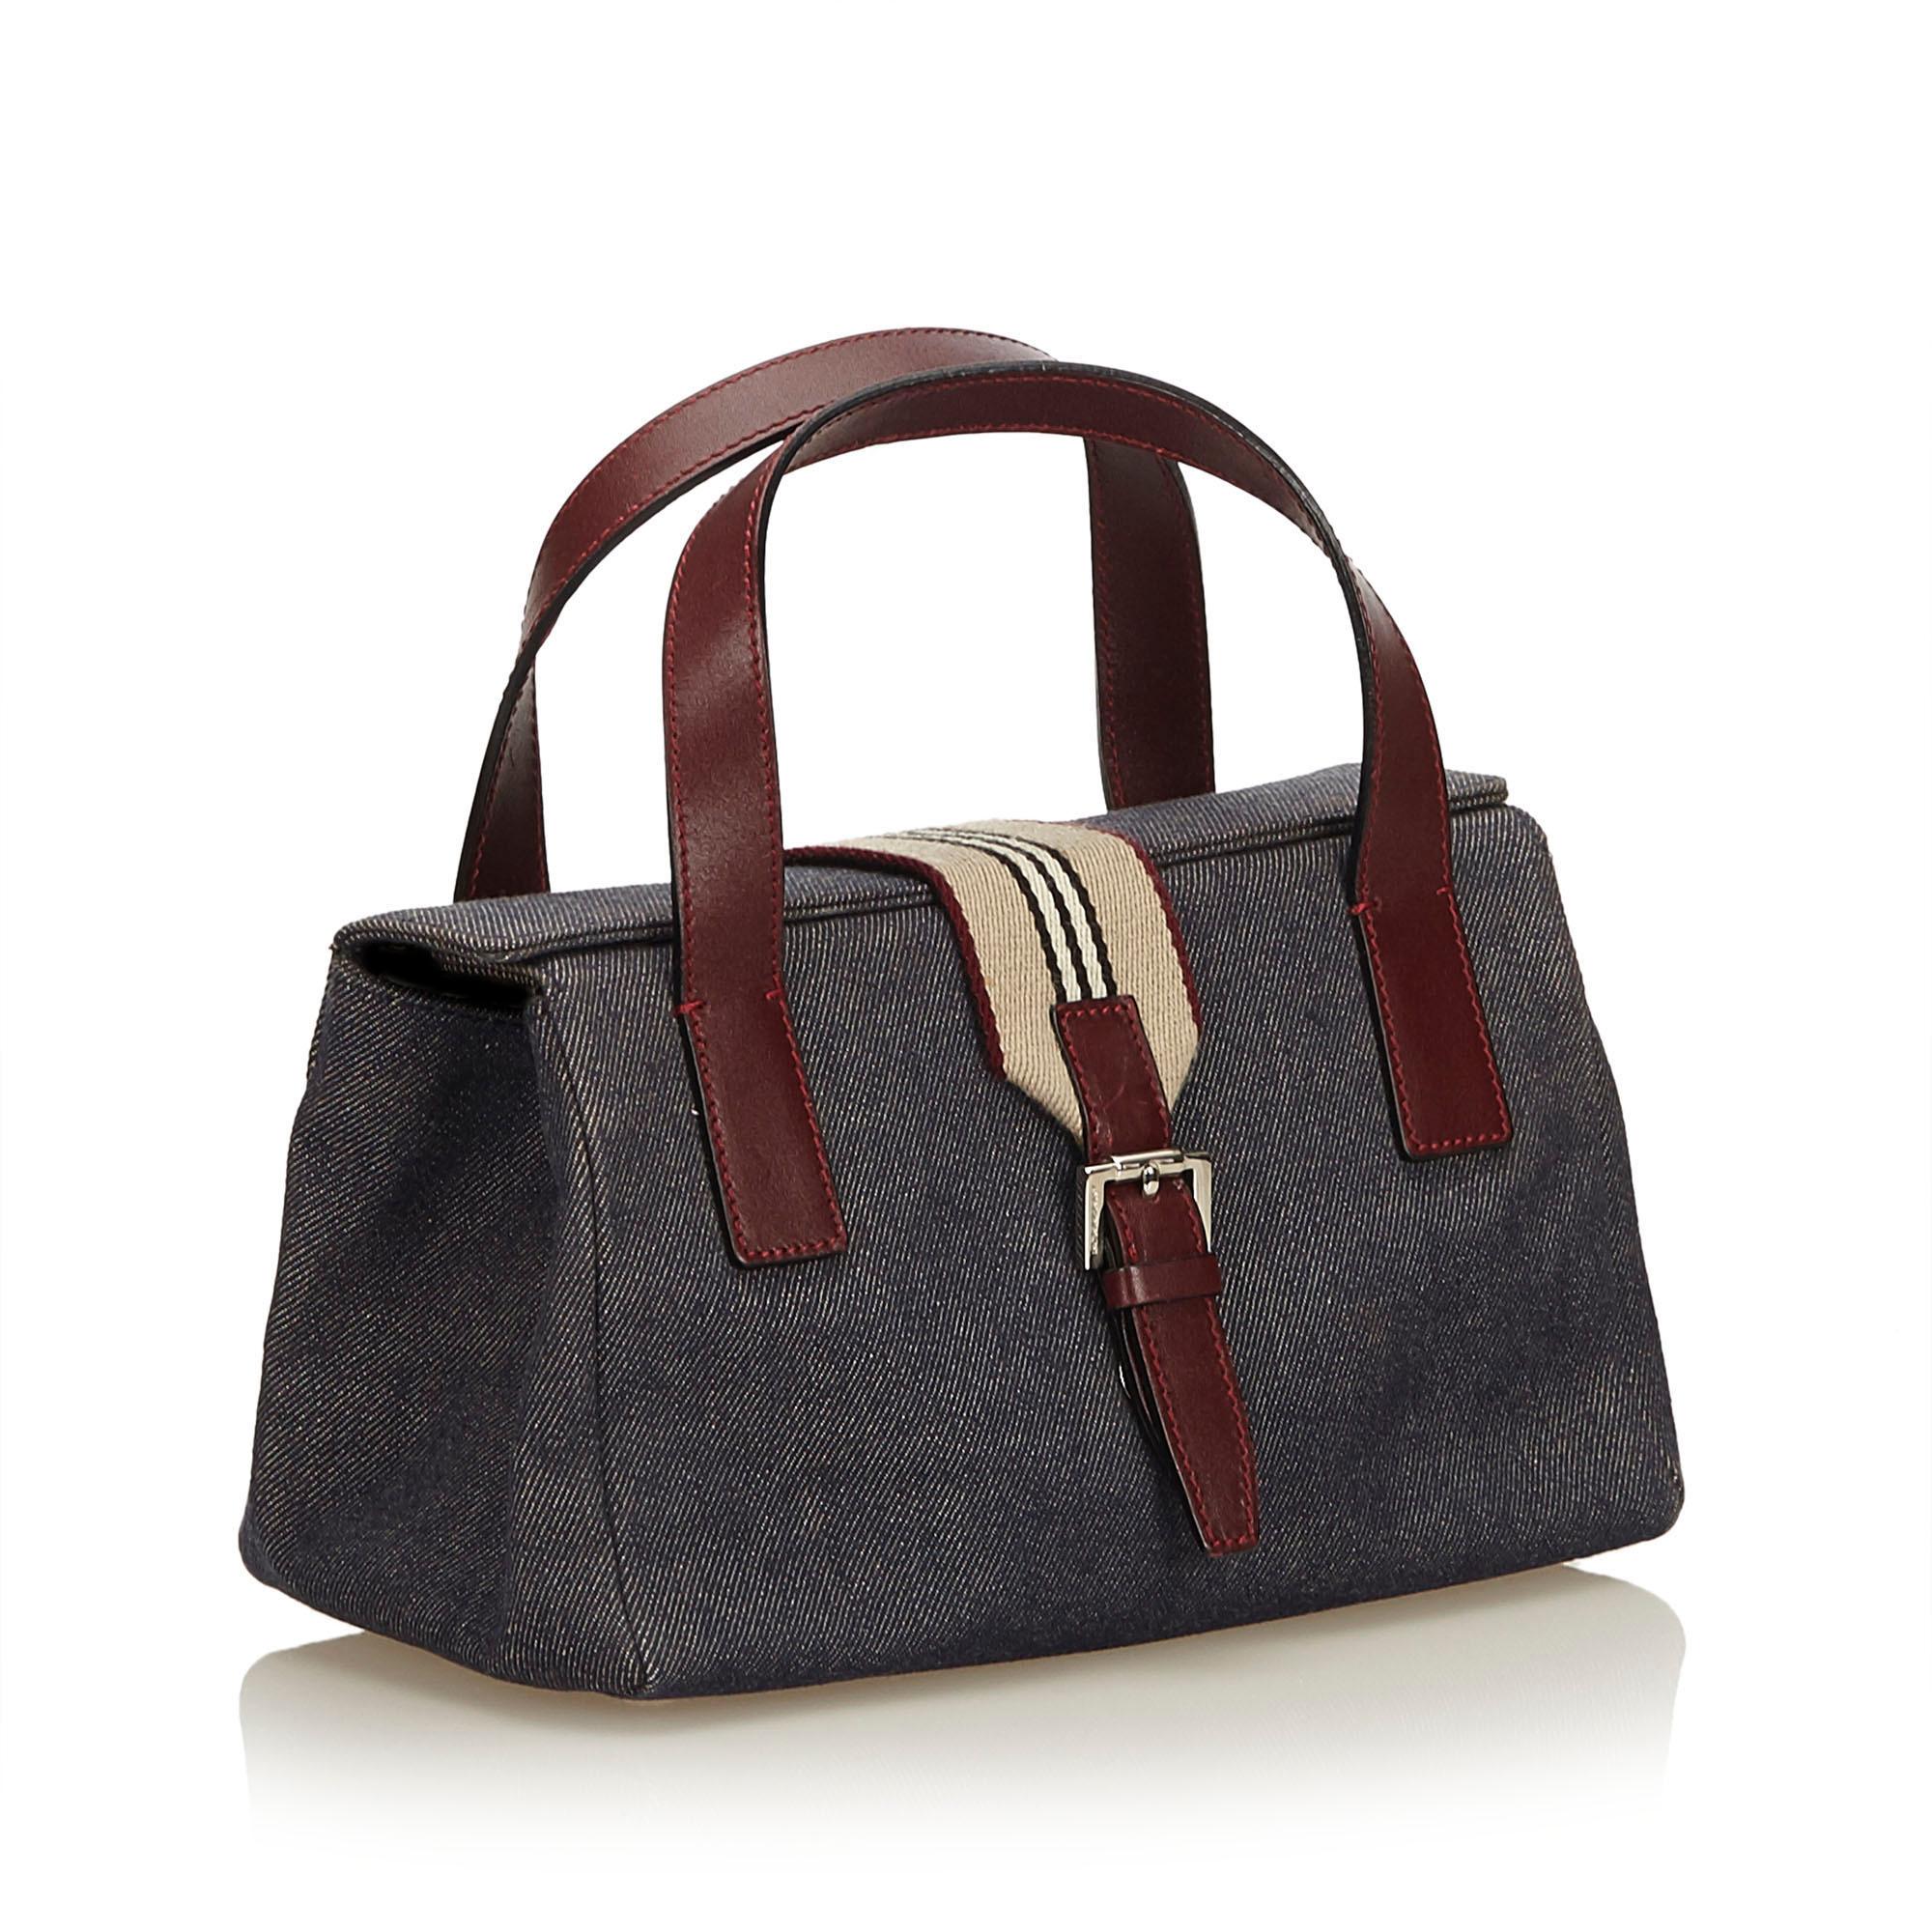 This handbag features a denim body, flat leather handles, top flap with front strap and magnetic closure, and an interior zip pocket It carries as B+ condition rating.

Inclusions: 
Dust Bag

Dimensions:
Length: 13.50 cm
Width: 24.00 cm
Depth: 13.50